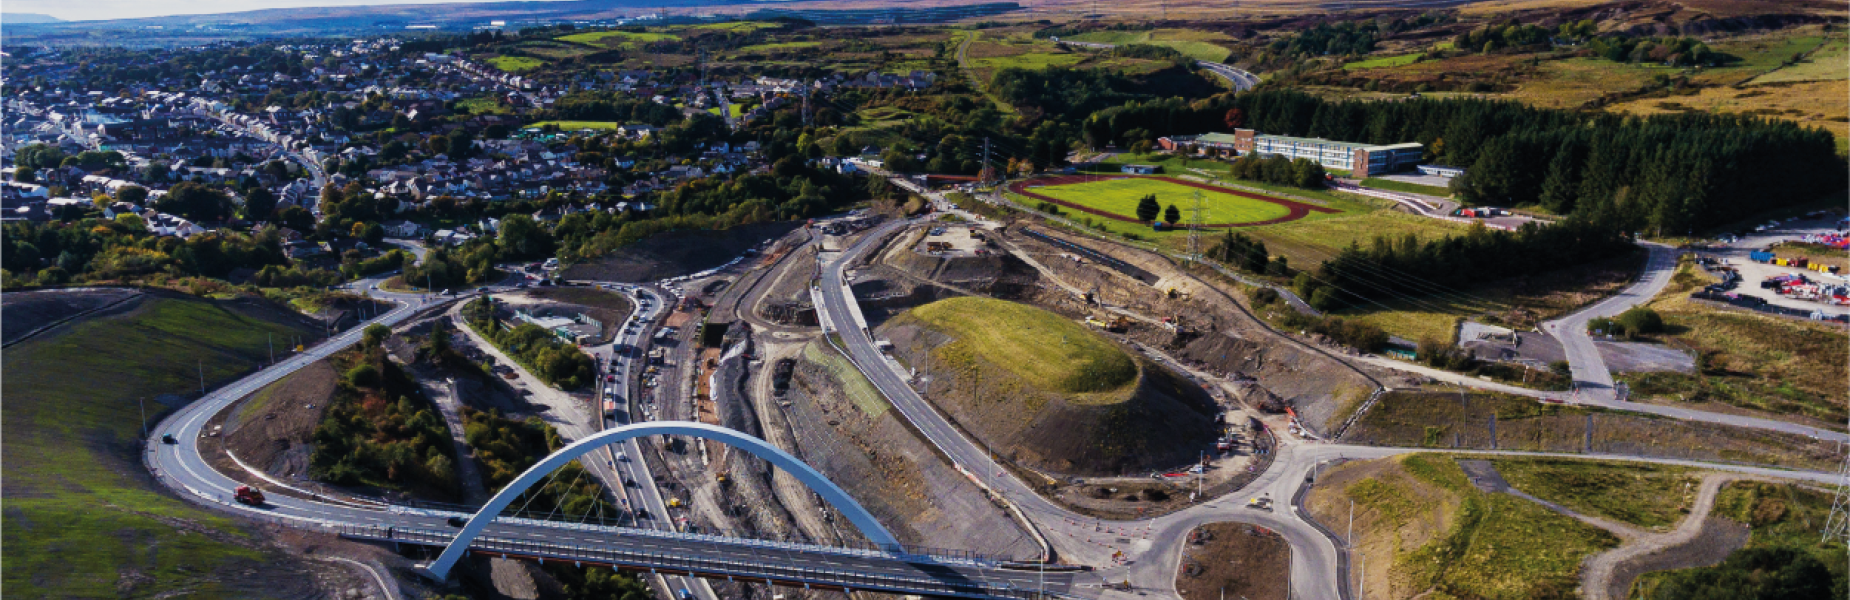 Aerial view of the construction of the A465 road in Wales